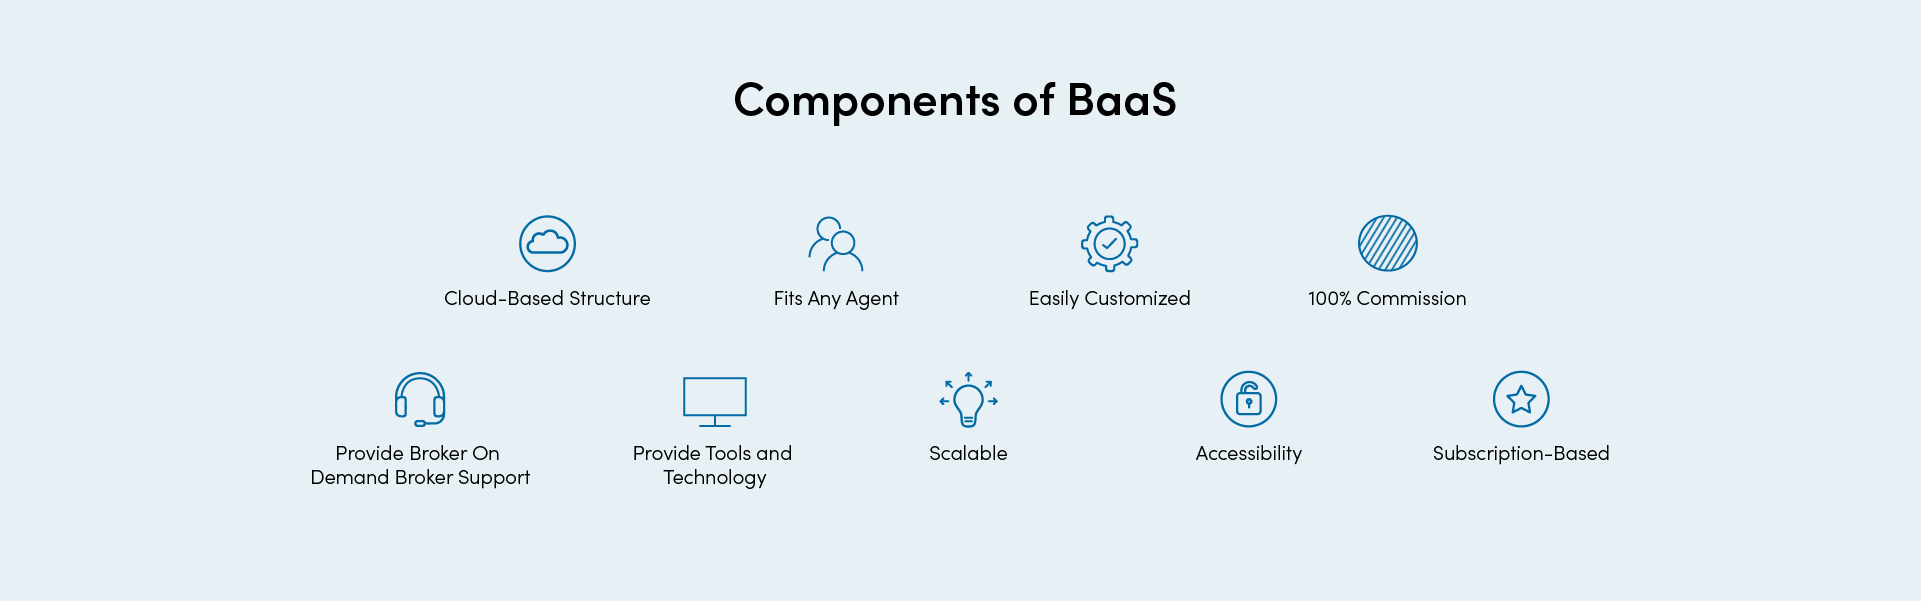 components of baas